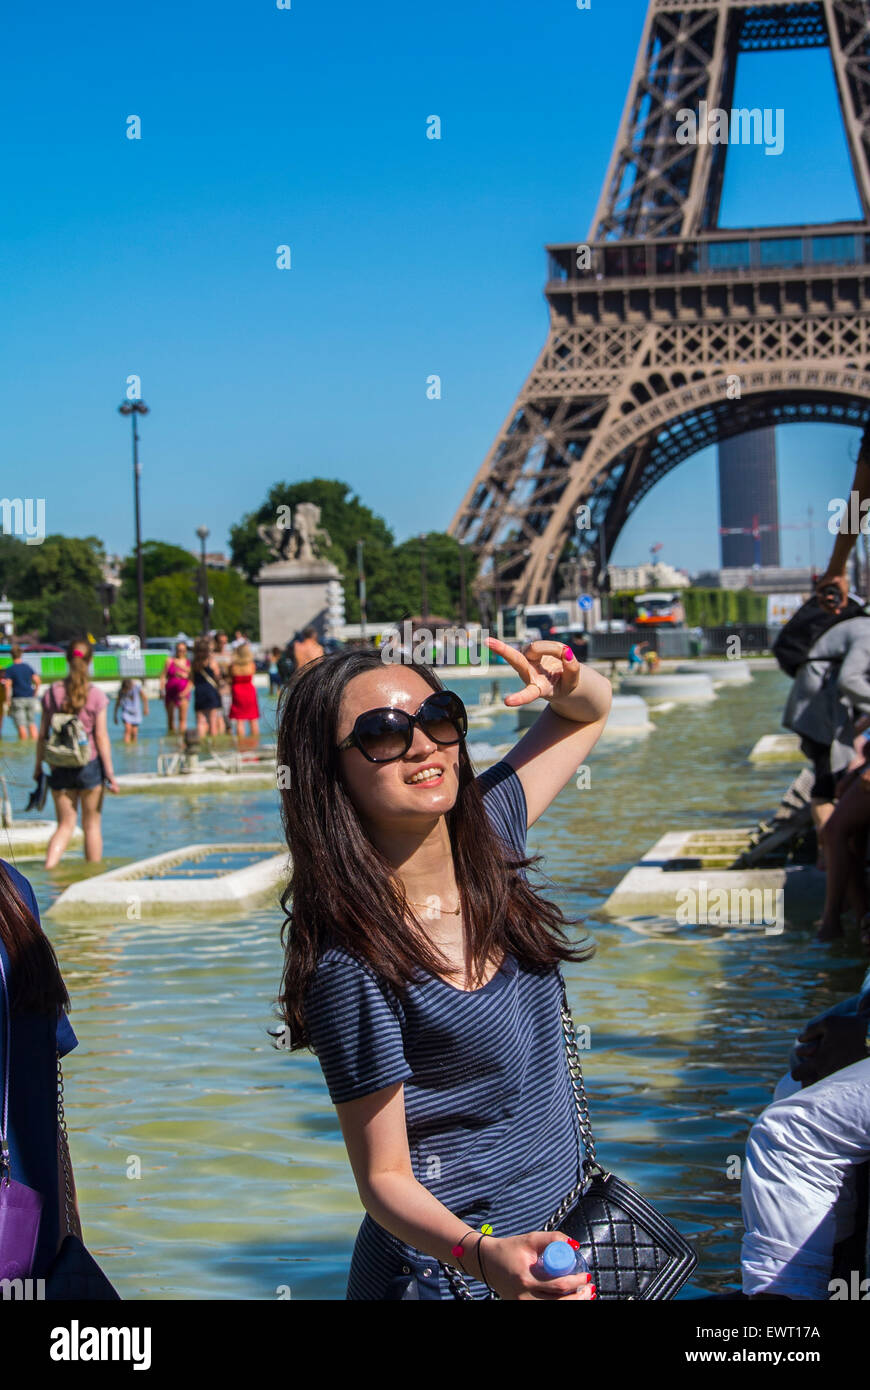 Paris, France. People Enjoying Summer Urban Heat Wave, at Eiffel Tower Pool, Chinese tourists Posing for Photos, Sunny Day, teens on hot day, [Teenager] Stock Photo